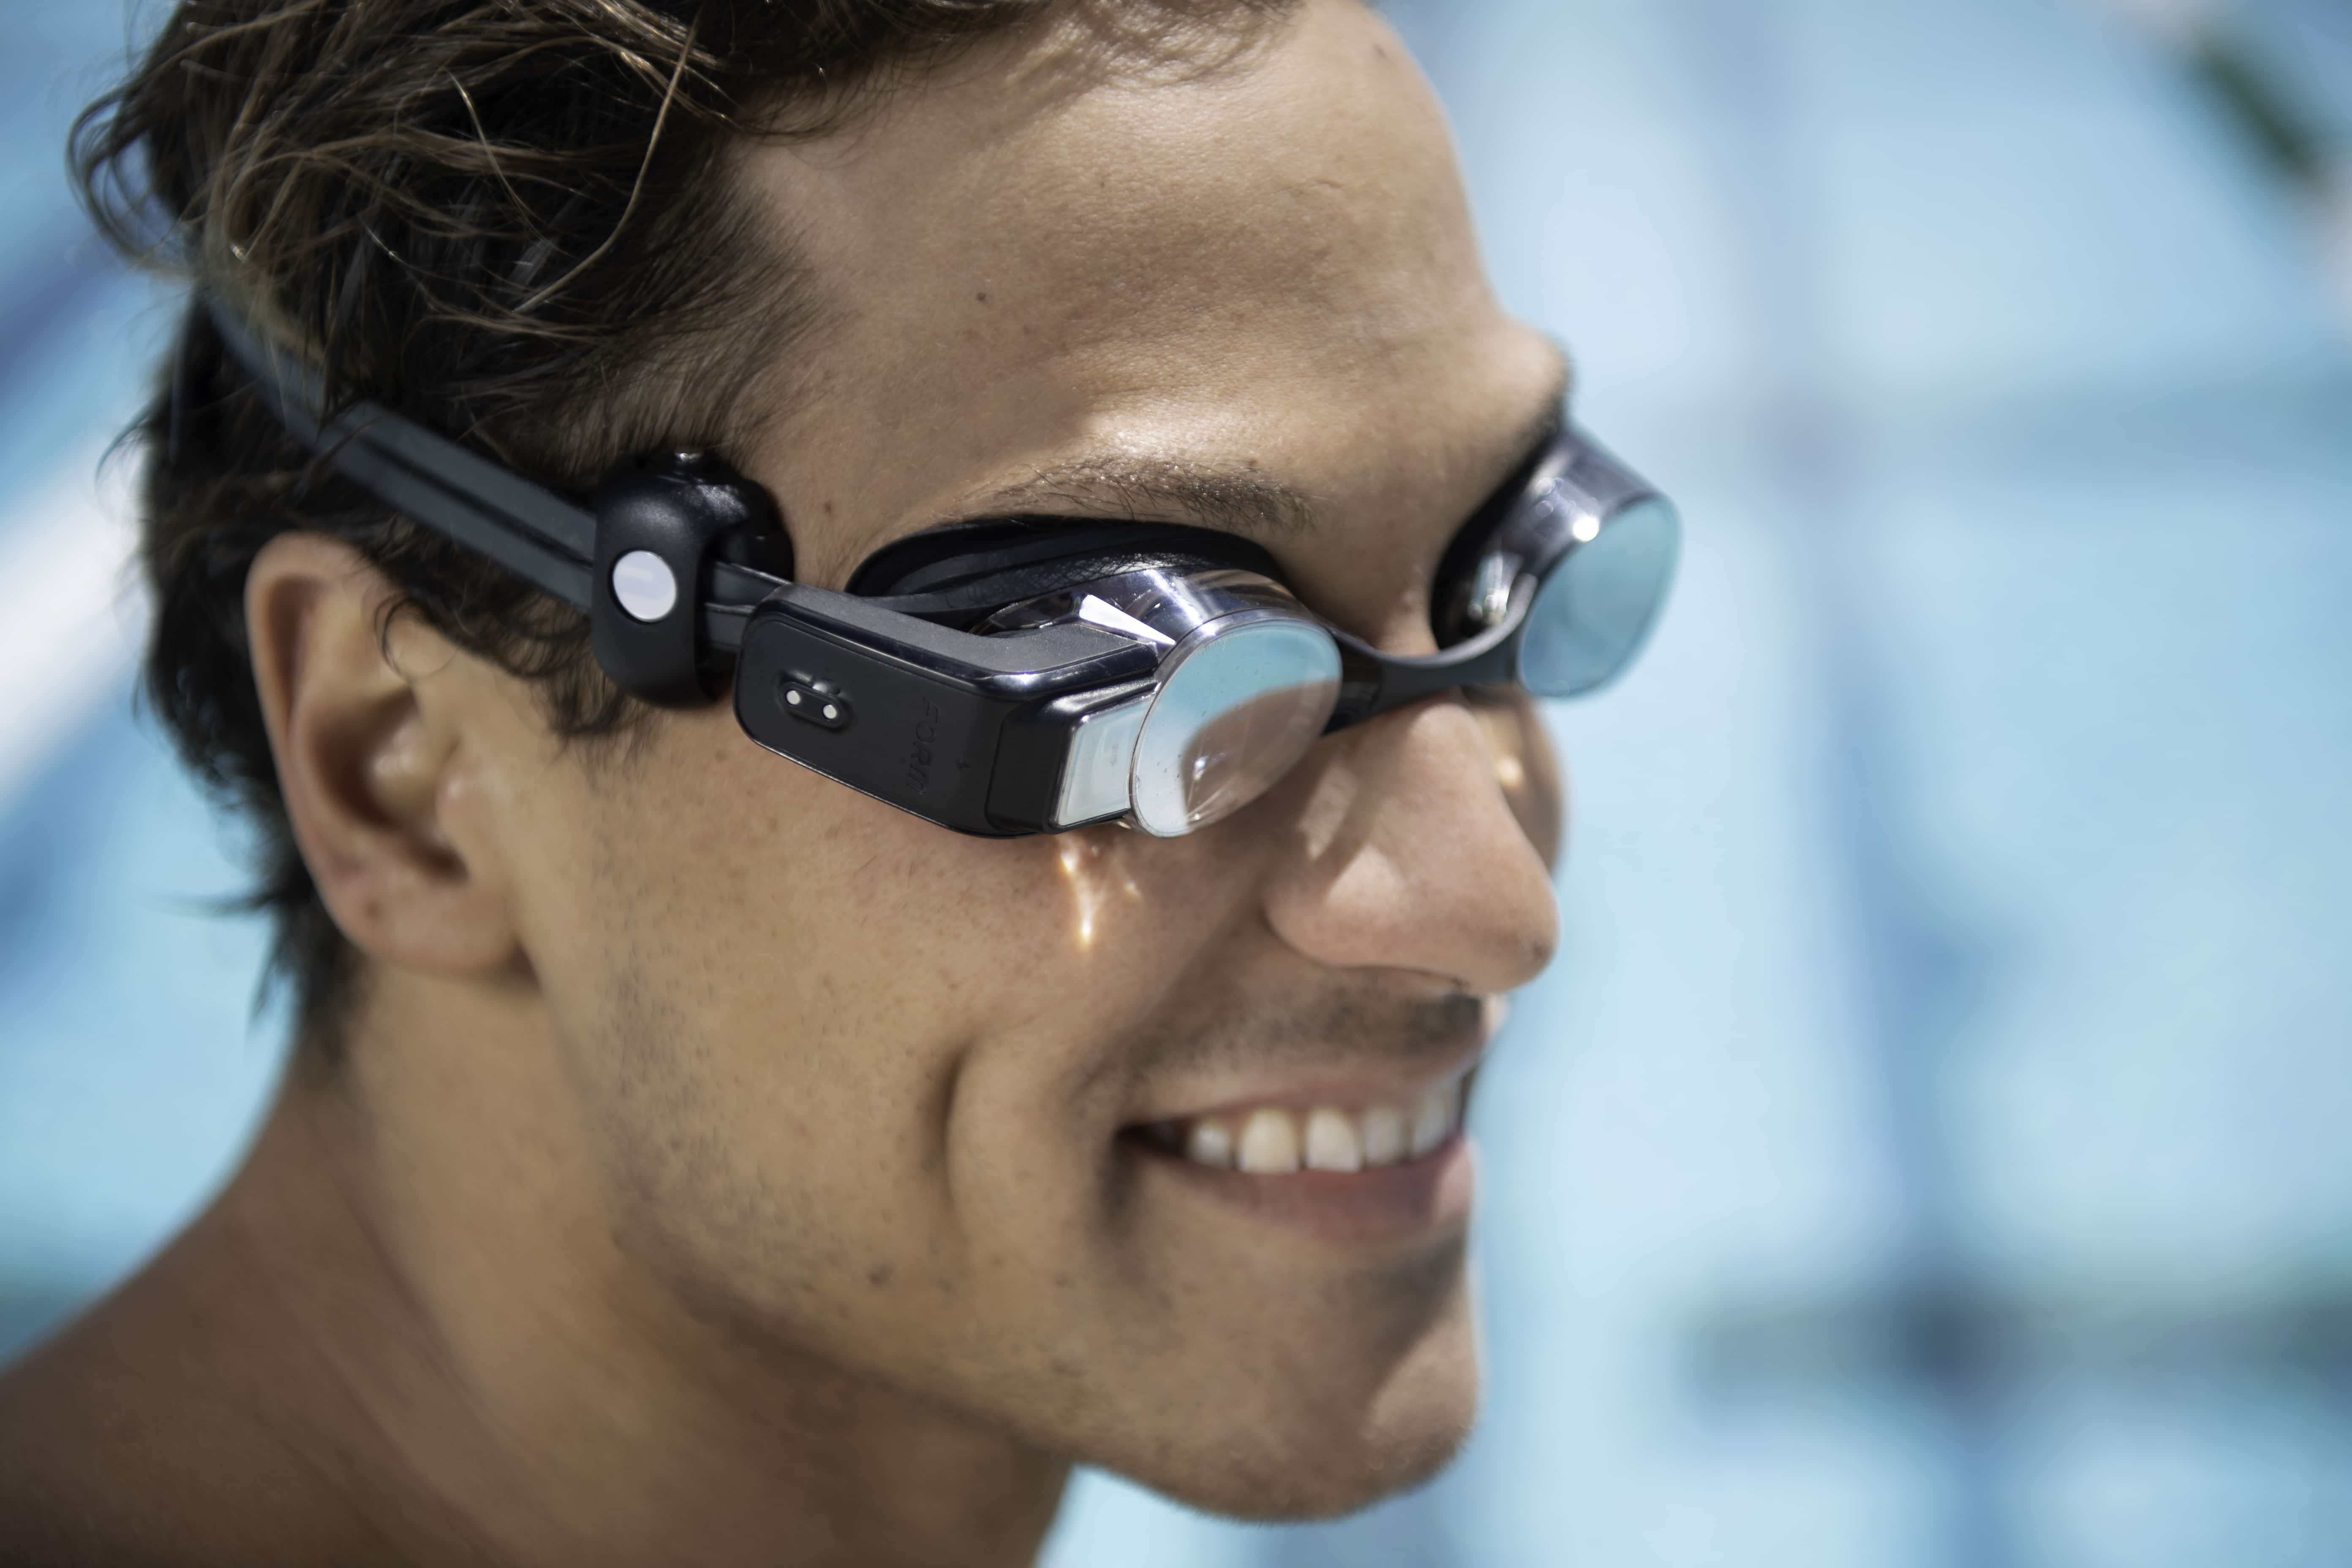 Now you can check your heart rate while you are swimming